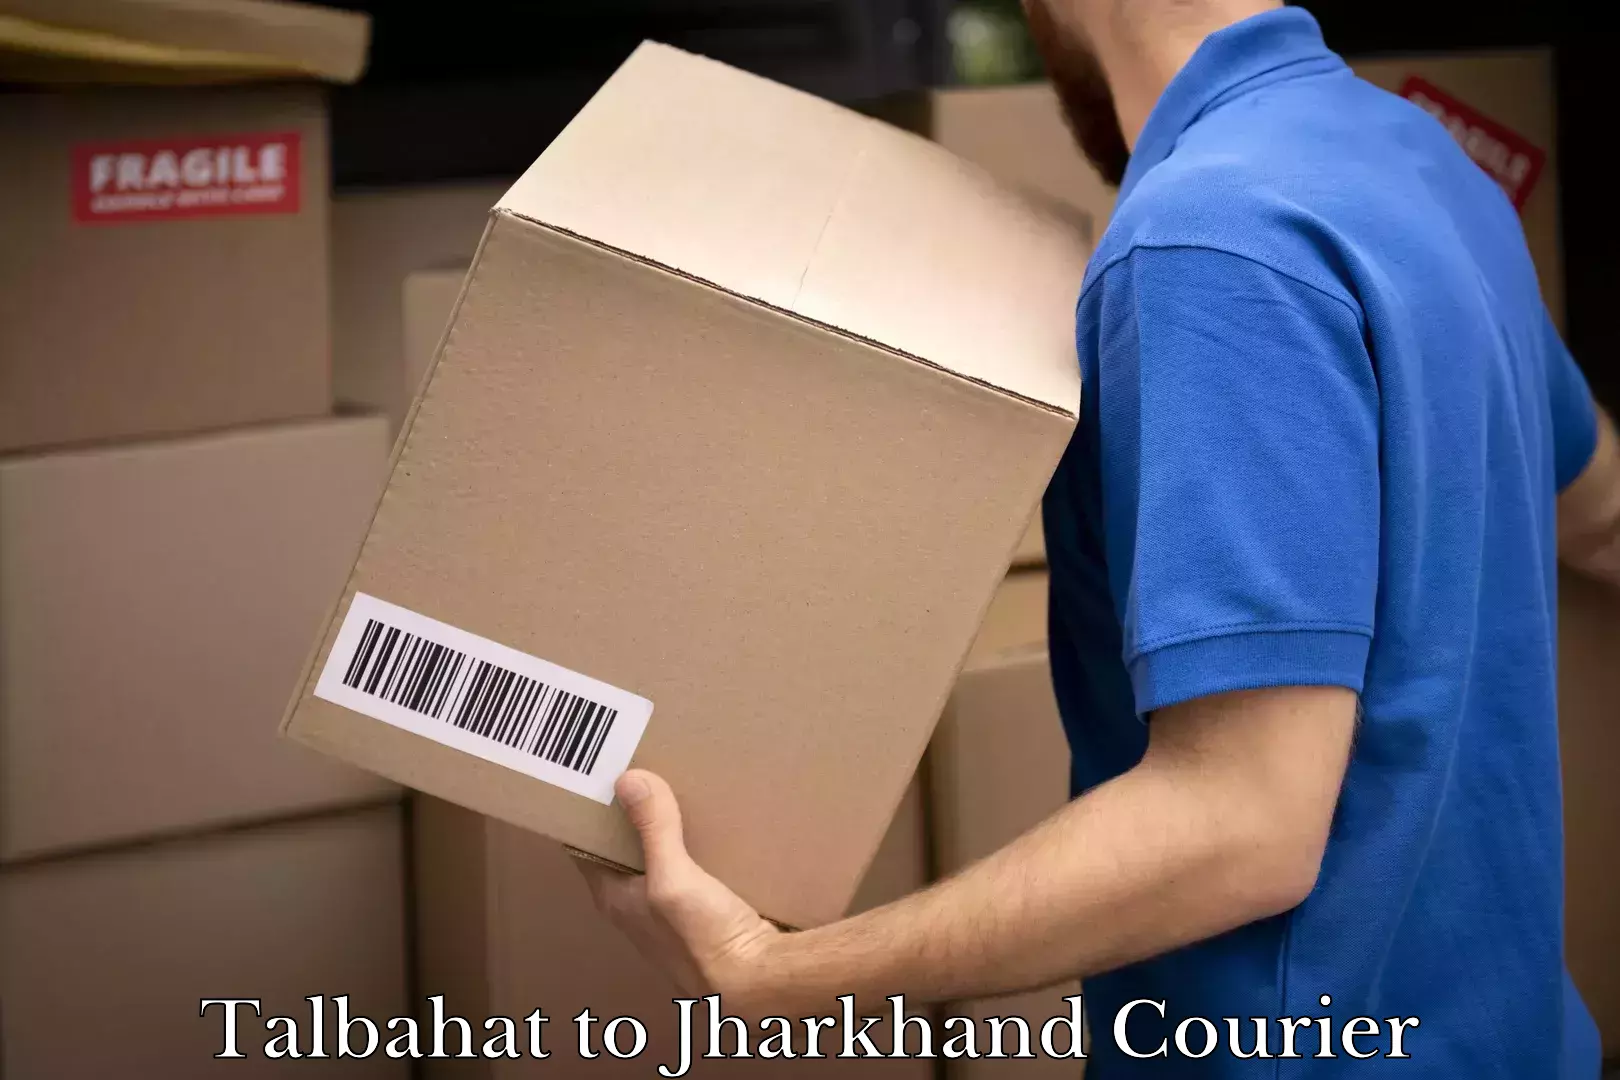 Efficient parcel service Talbahat to Jharkhand